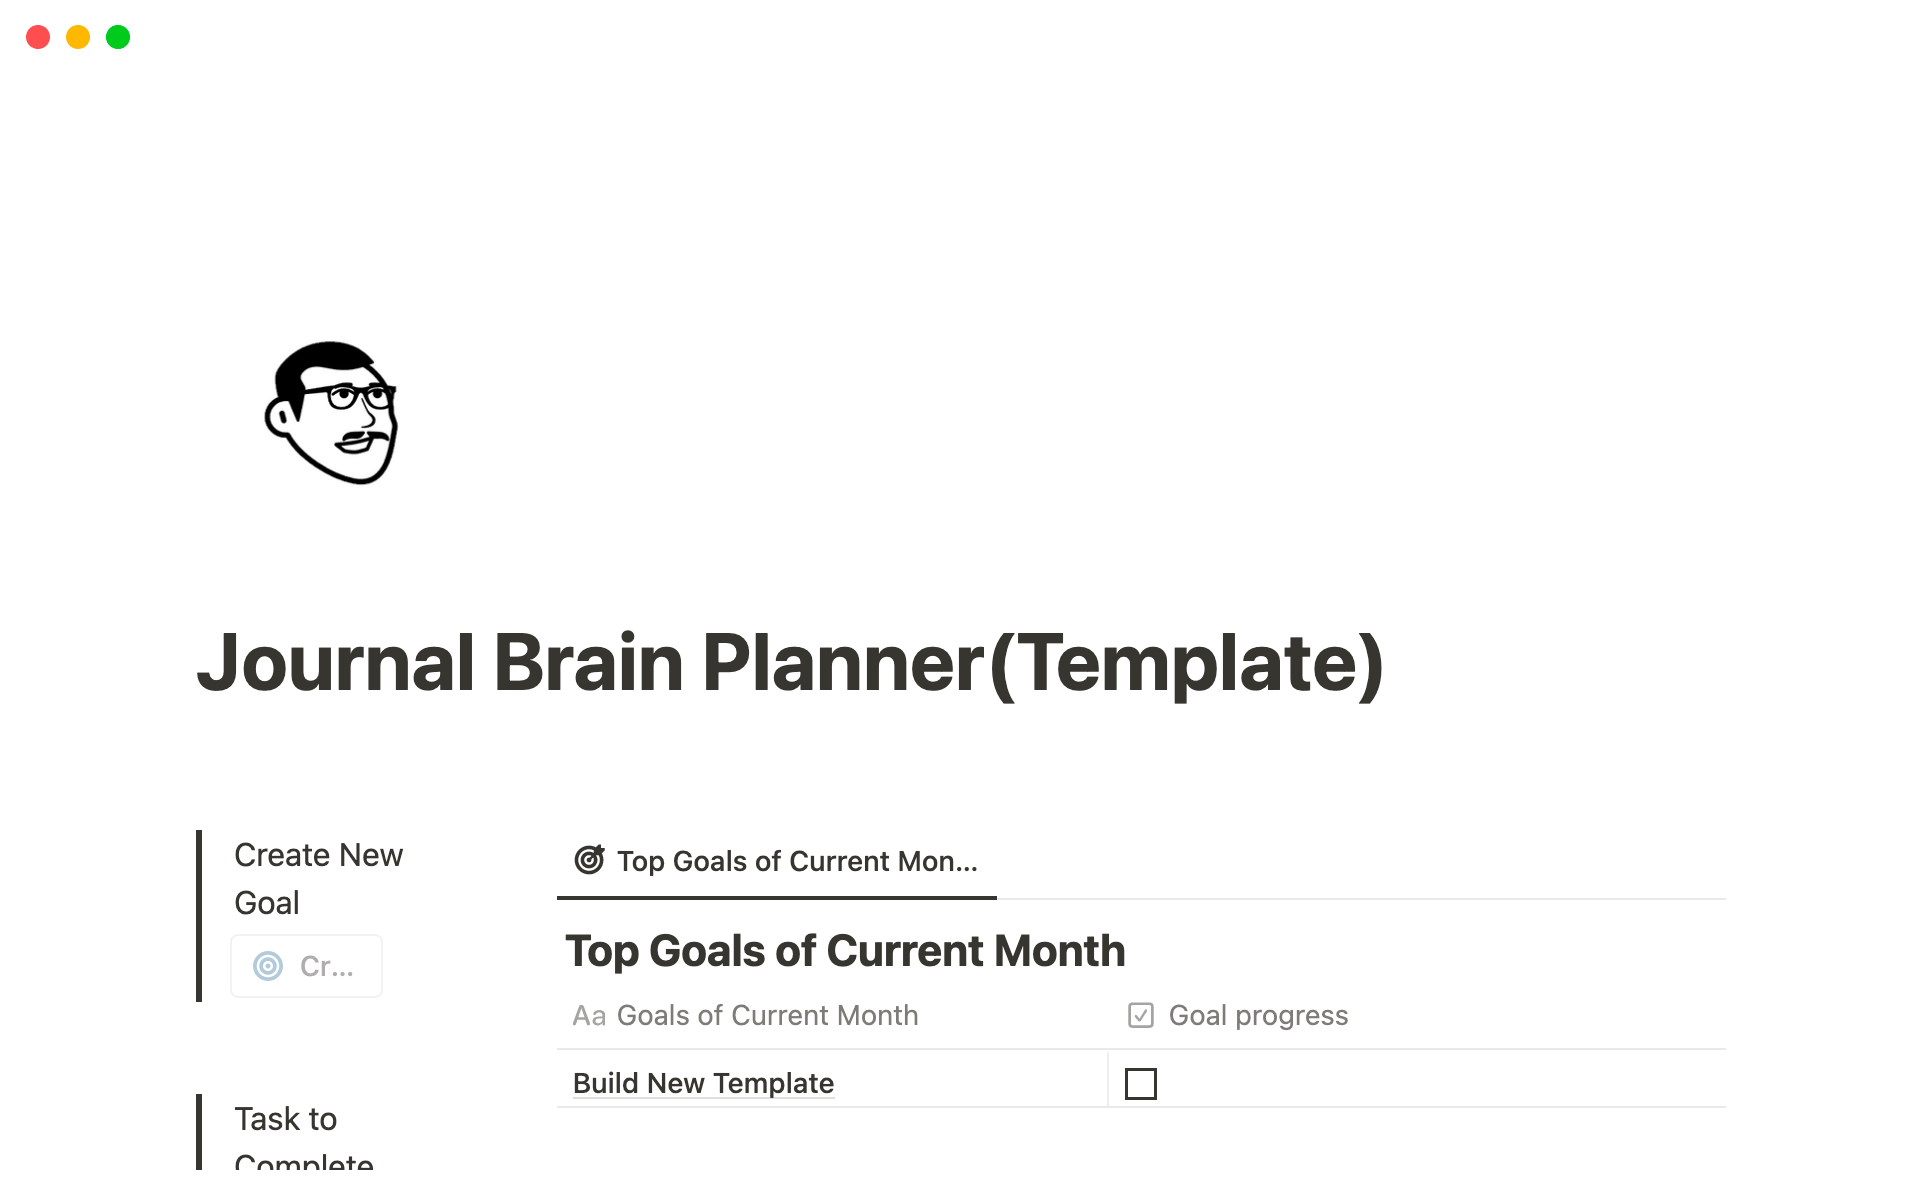 Journal Brain Planner is easy way to track your progress over for a month.